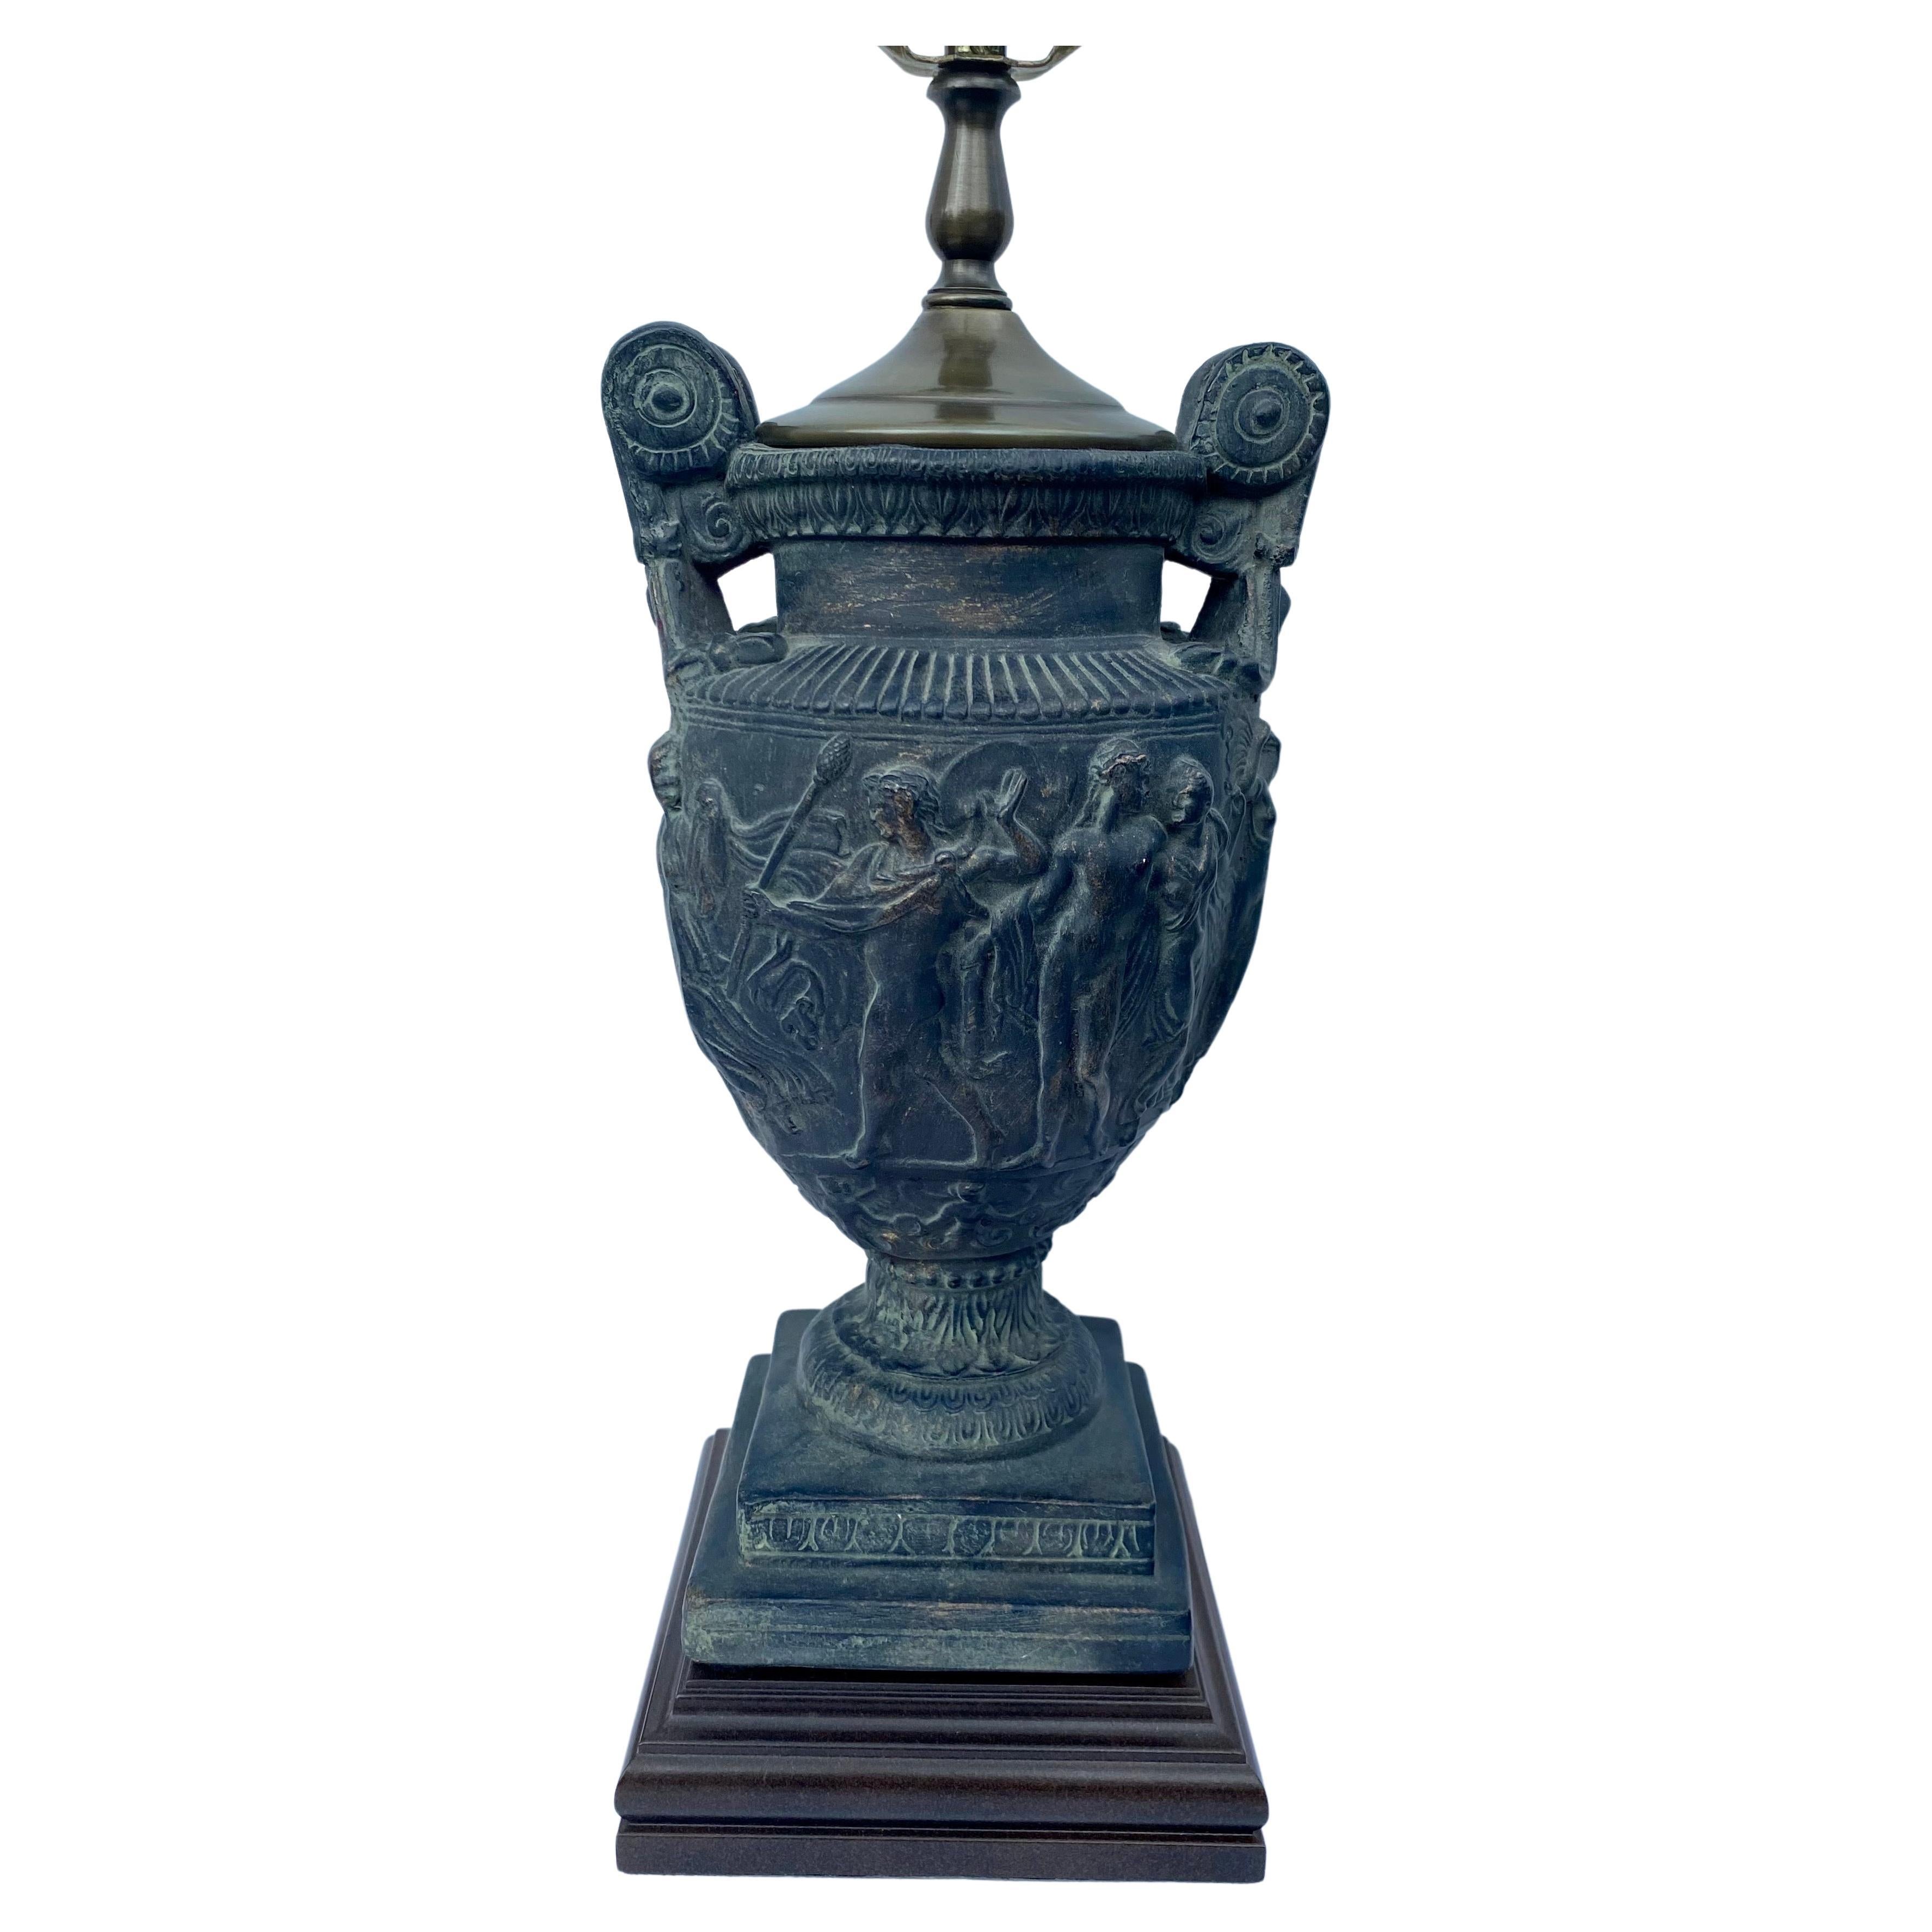 Neoclassical Classical Roman Figural Plaster Urn Vase Table Lamp For Sale